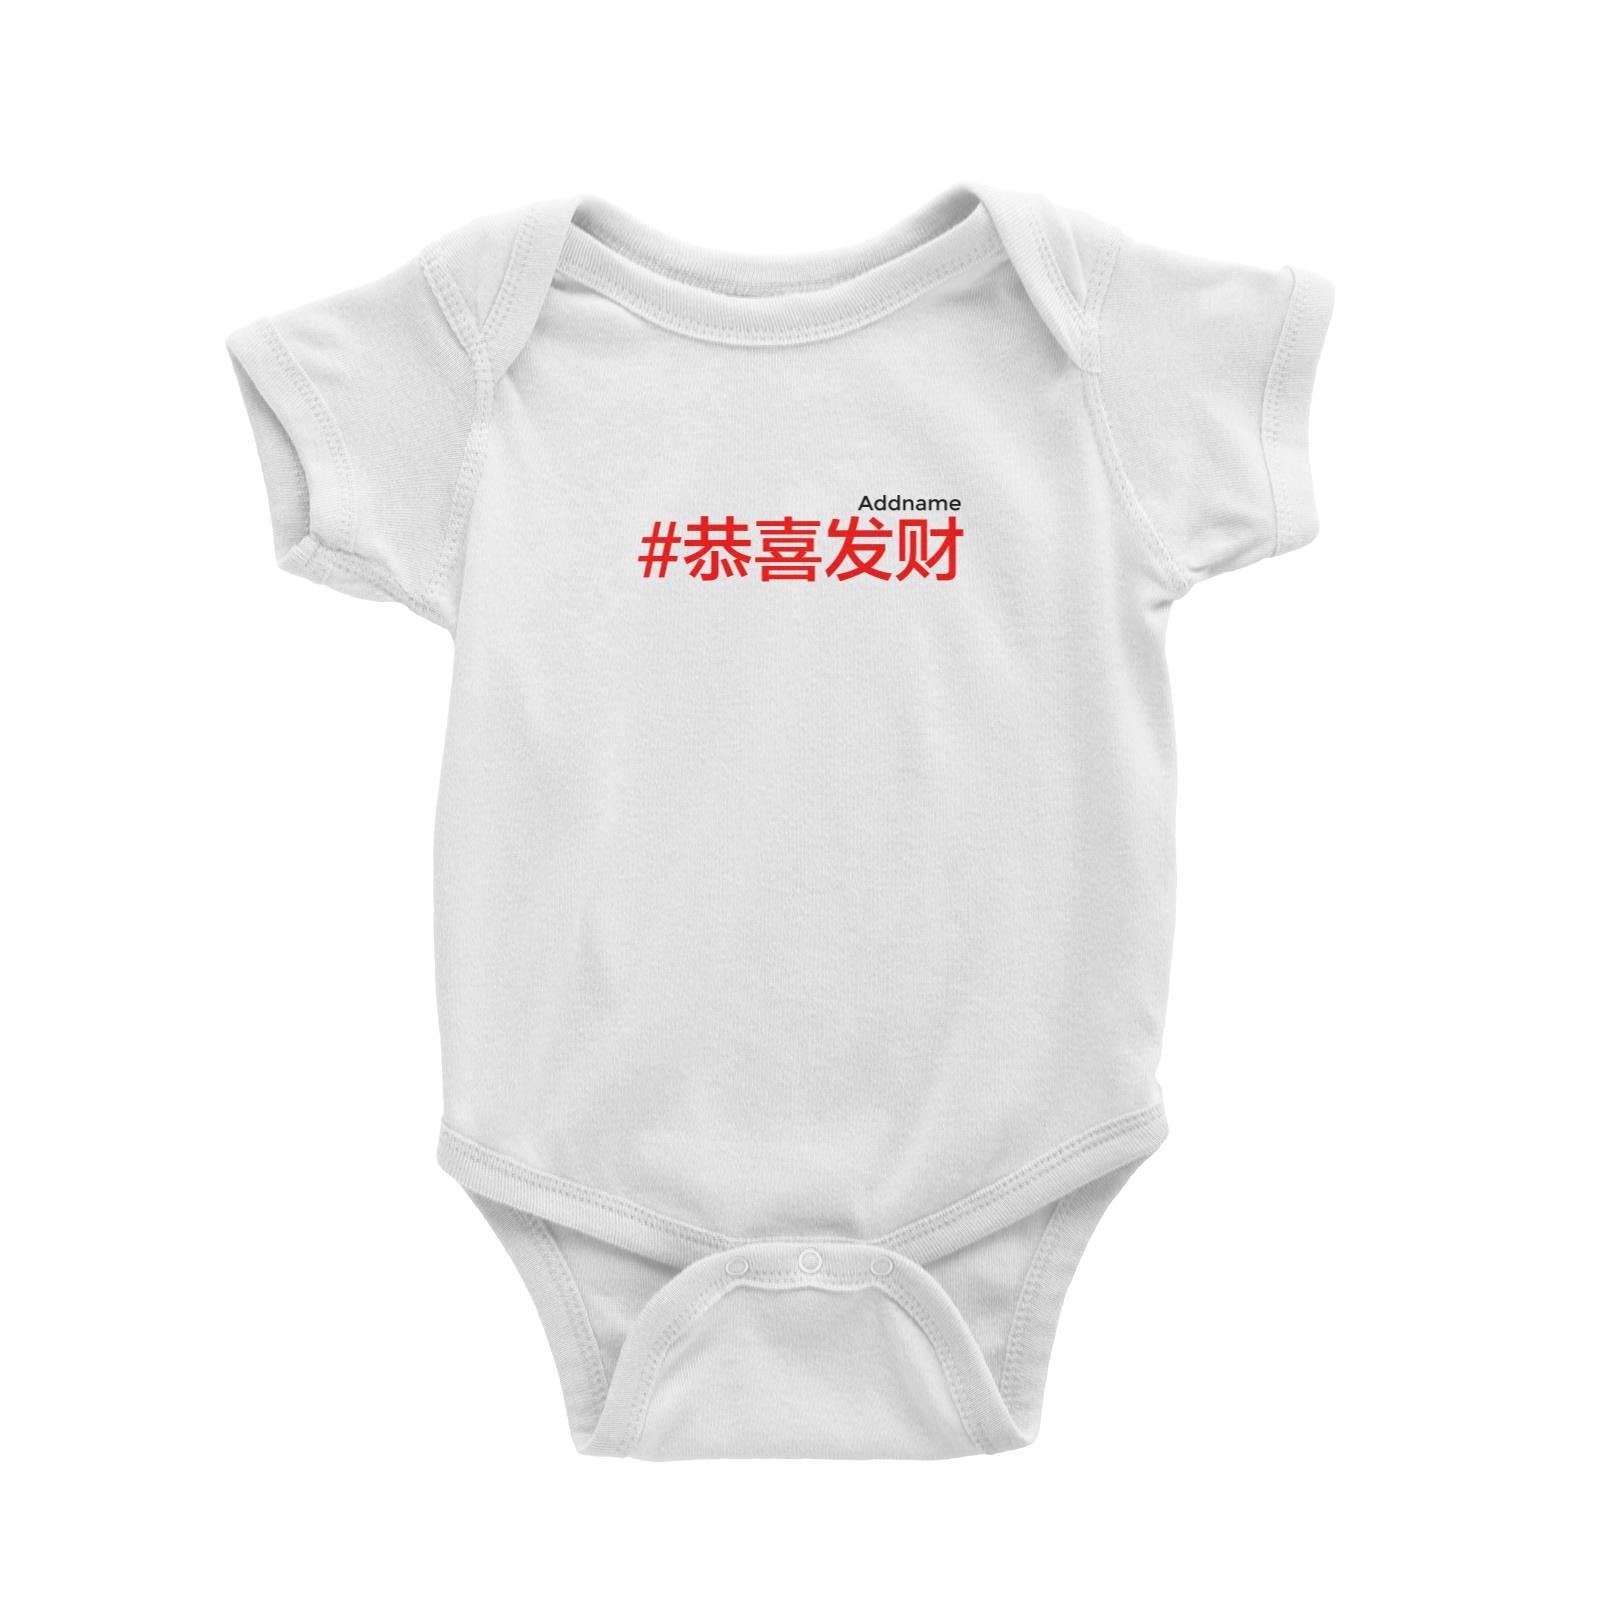 Chinese New Year Hashtag Gong Xi Fa Cai Chinese Baby Romper  Personalizable Designs